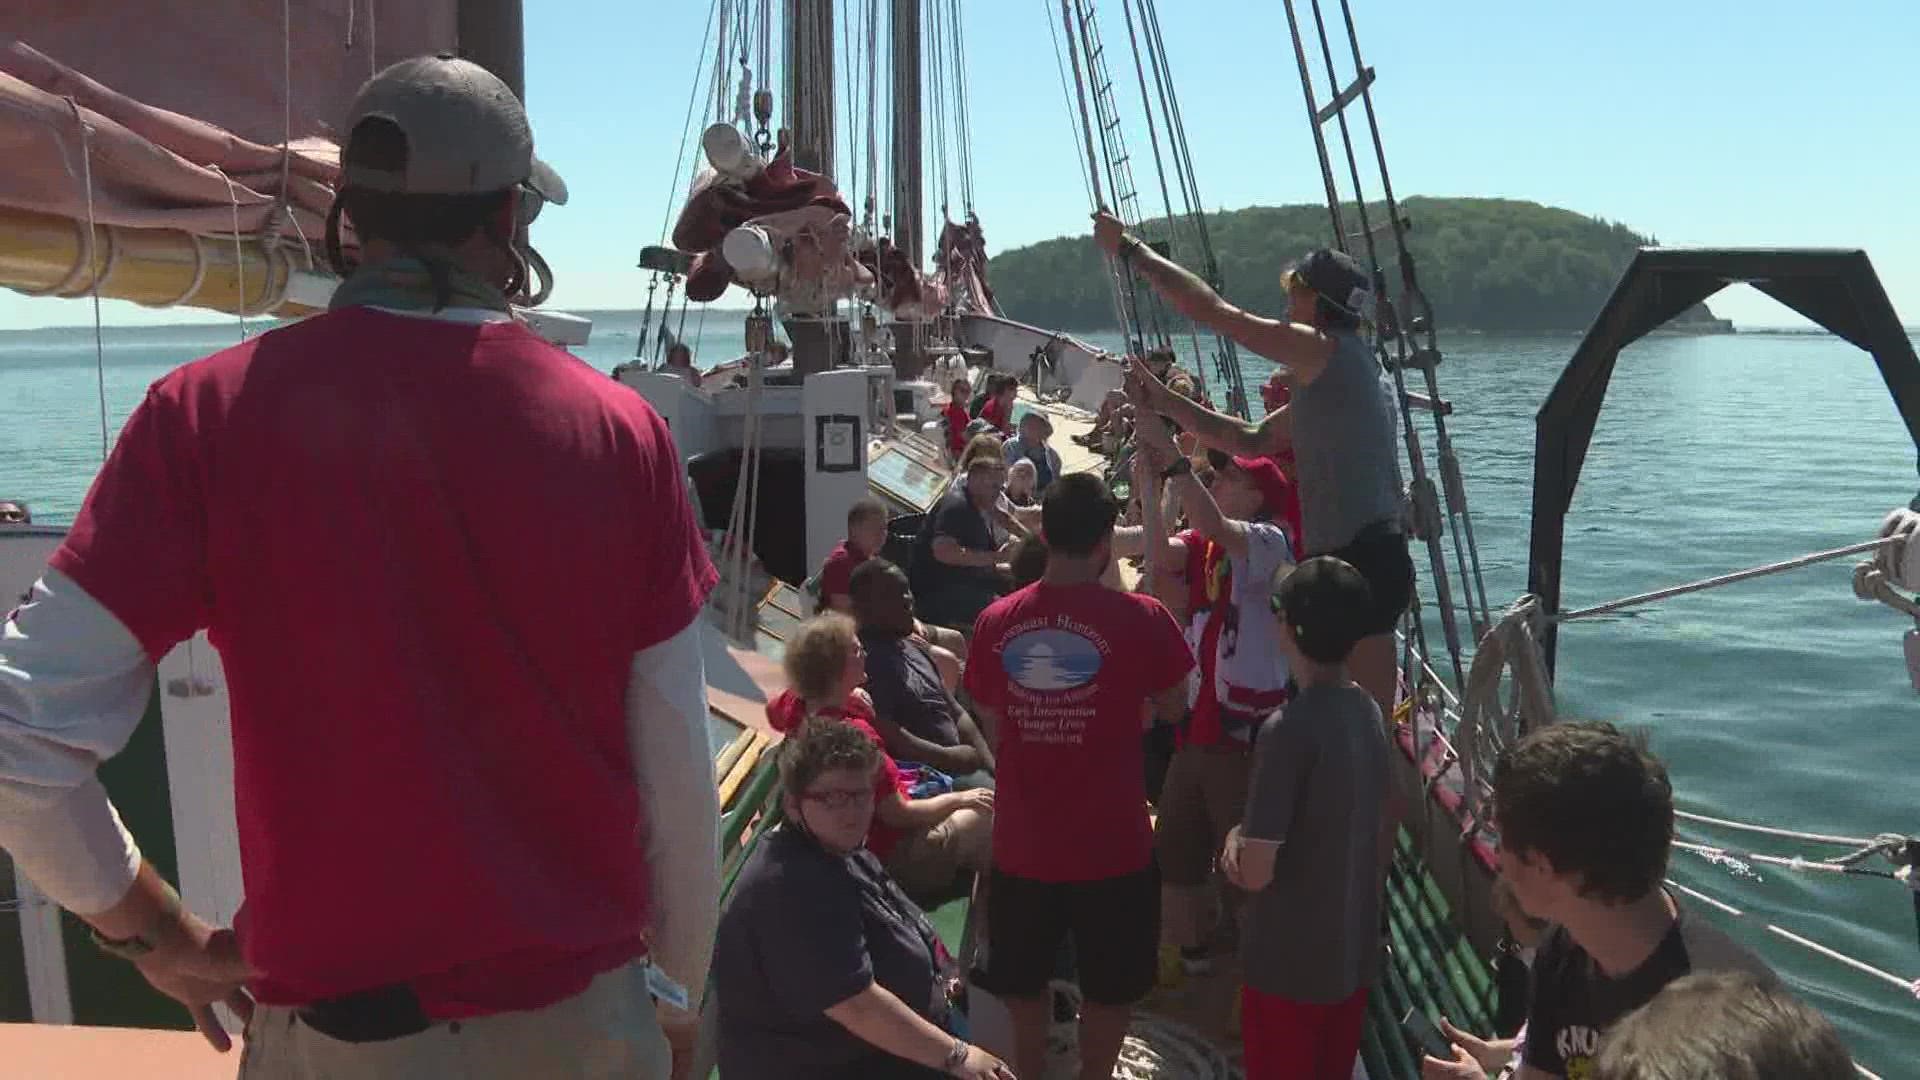 “I really enjoy it because it’s relaxing,” Ray, a passenger on the Margaret Todd schooner, said.